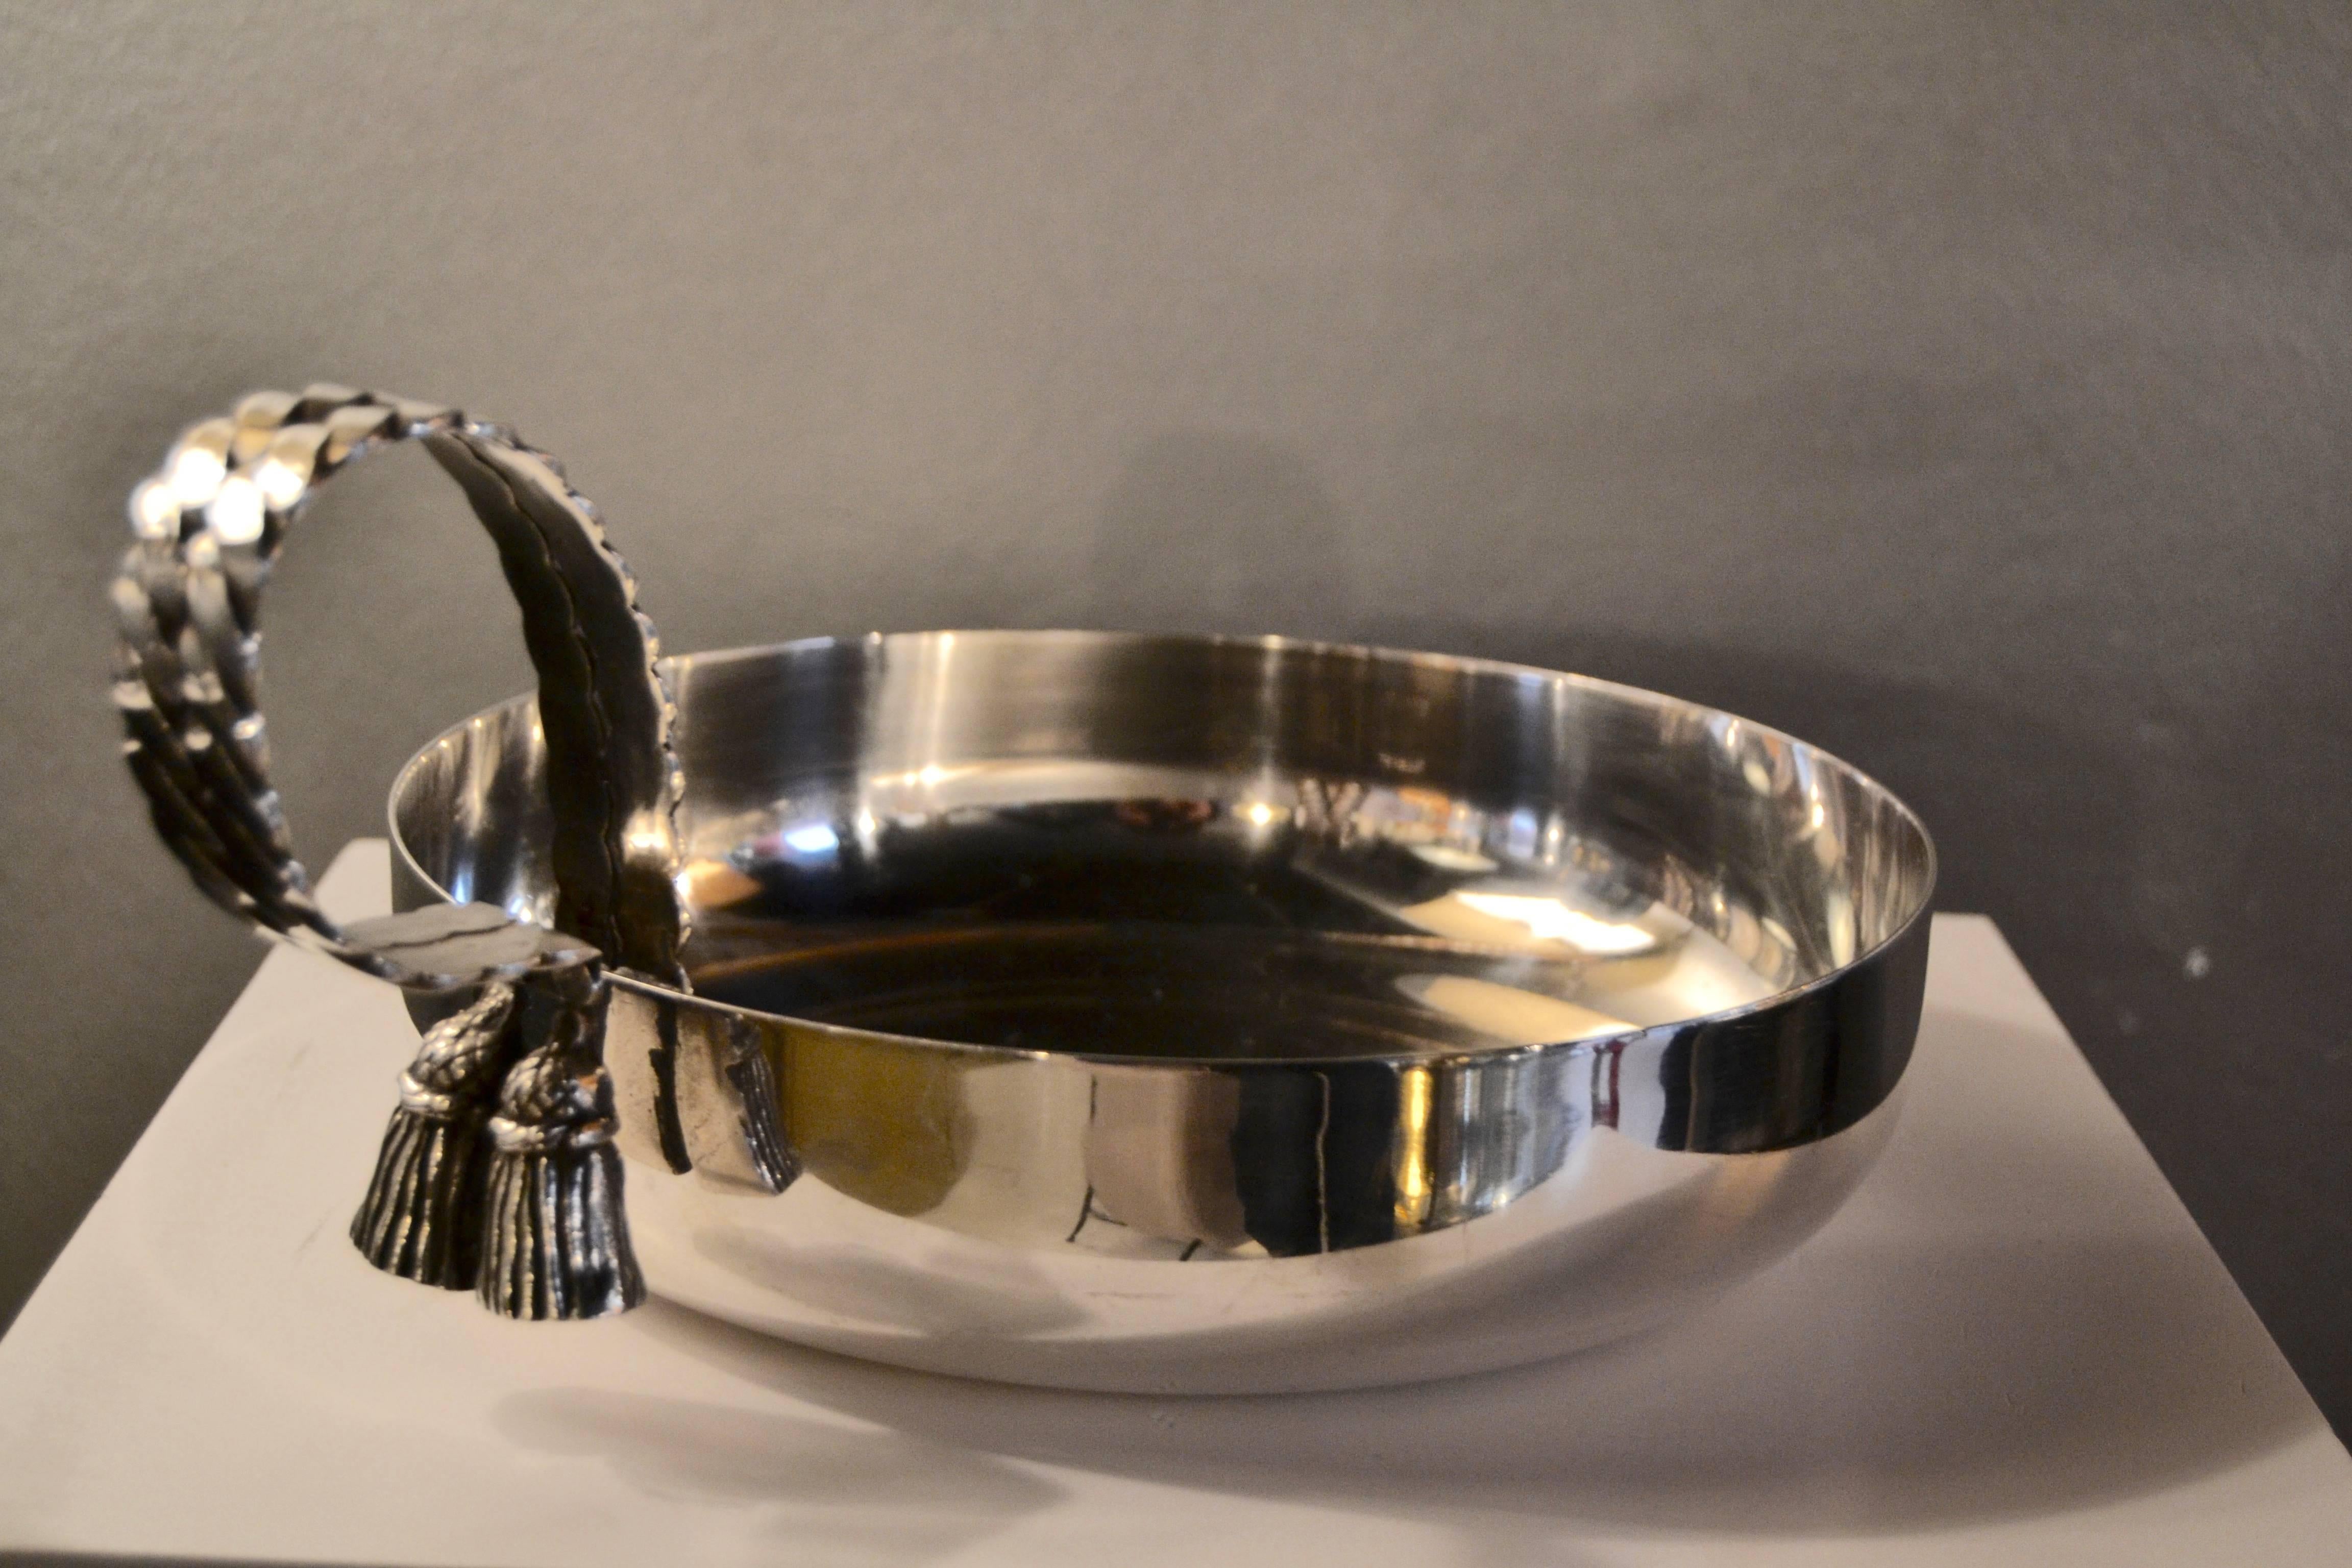 1970s silver plated bowl by Maria Pergay.